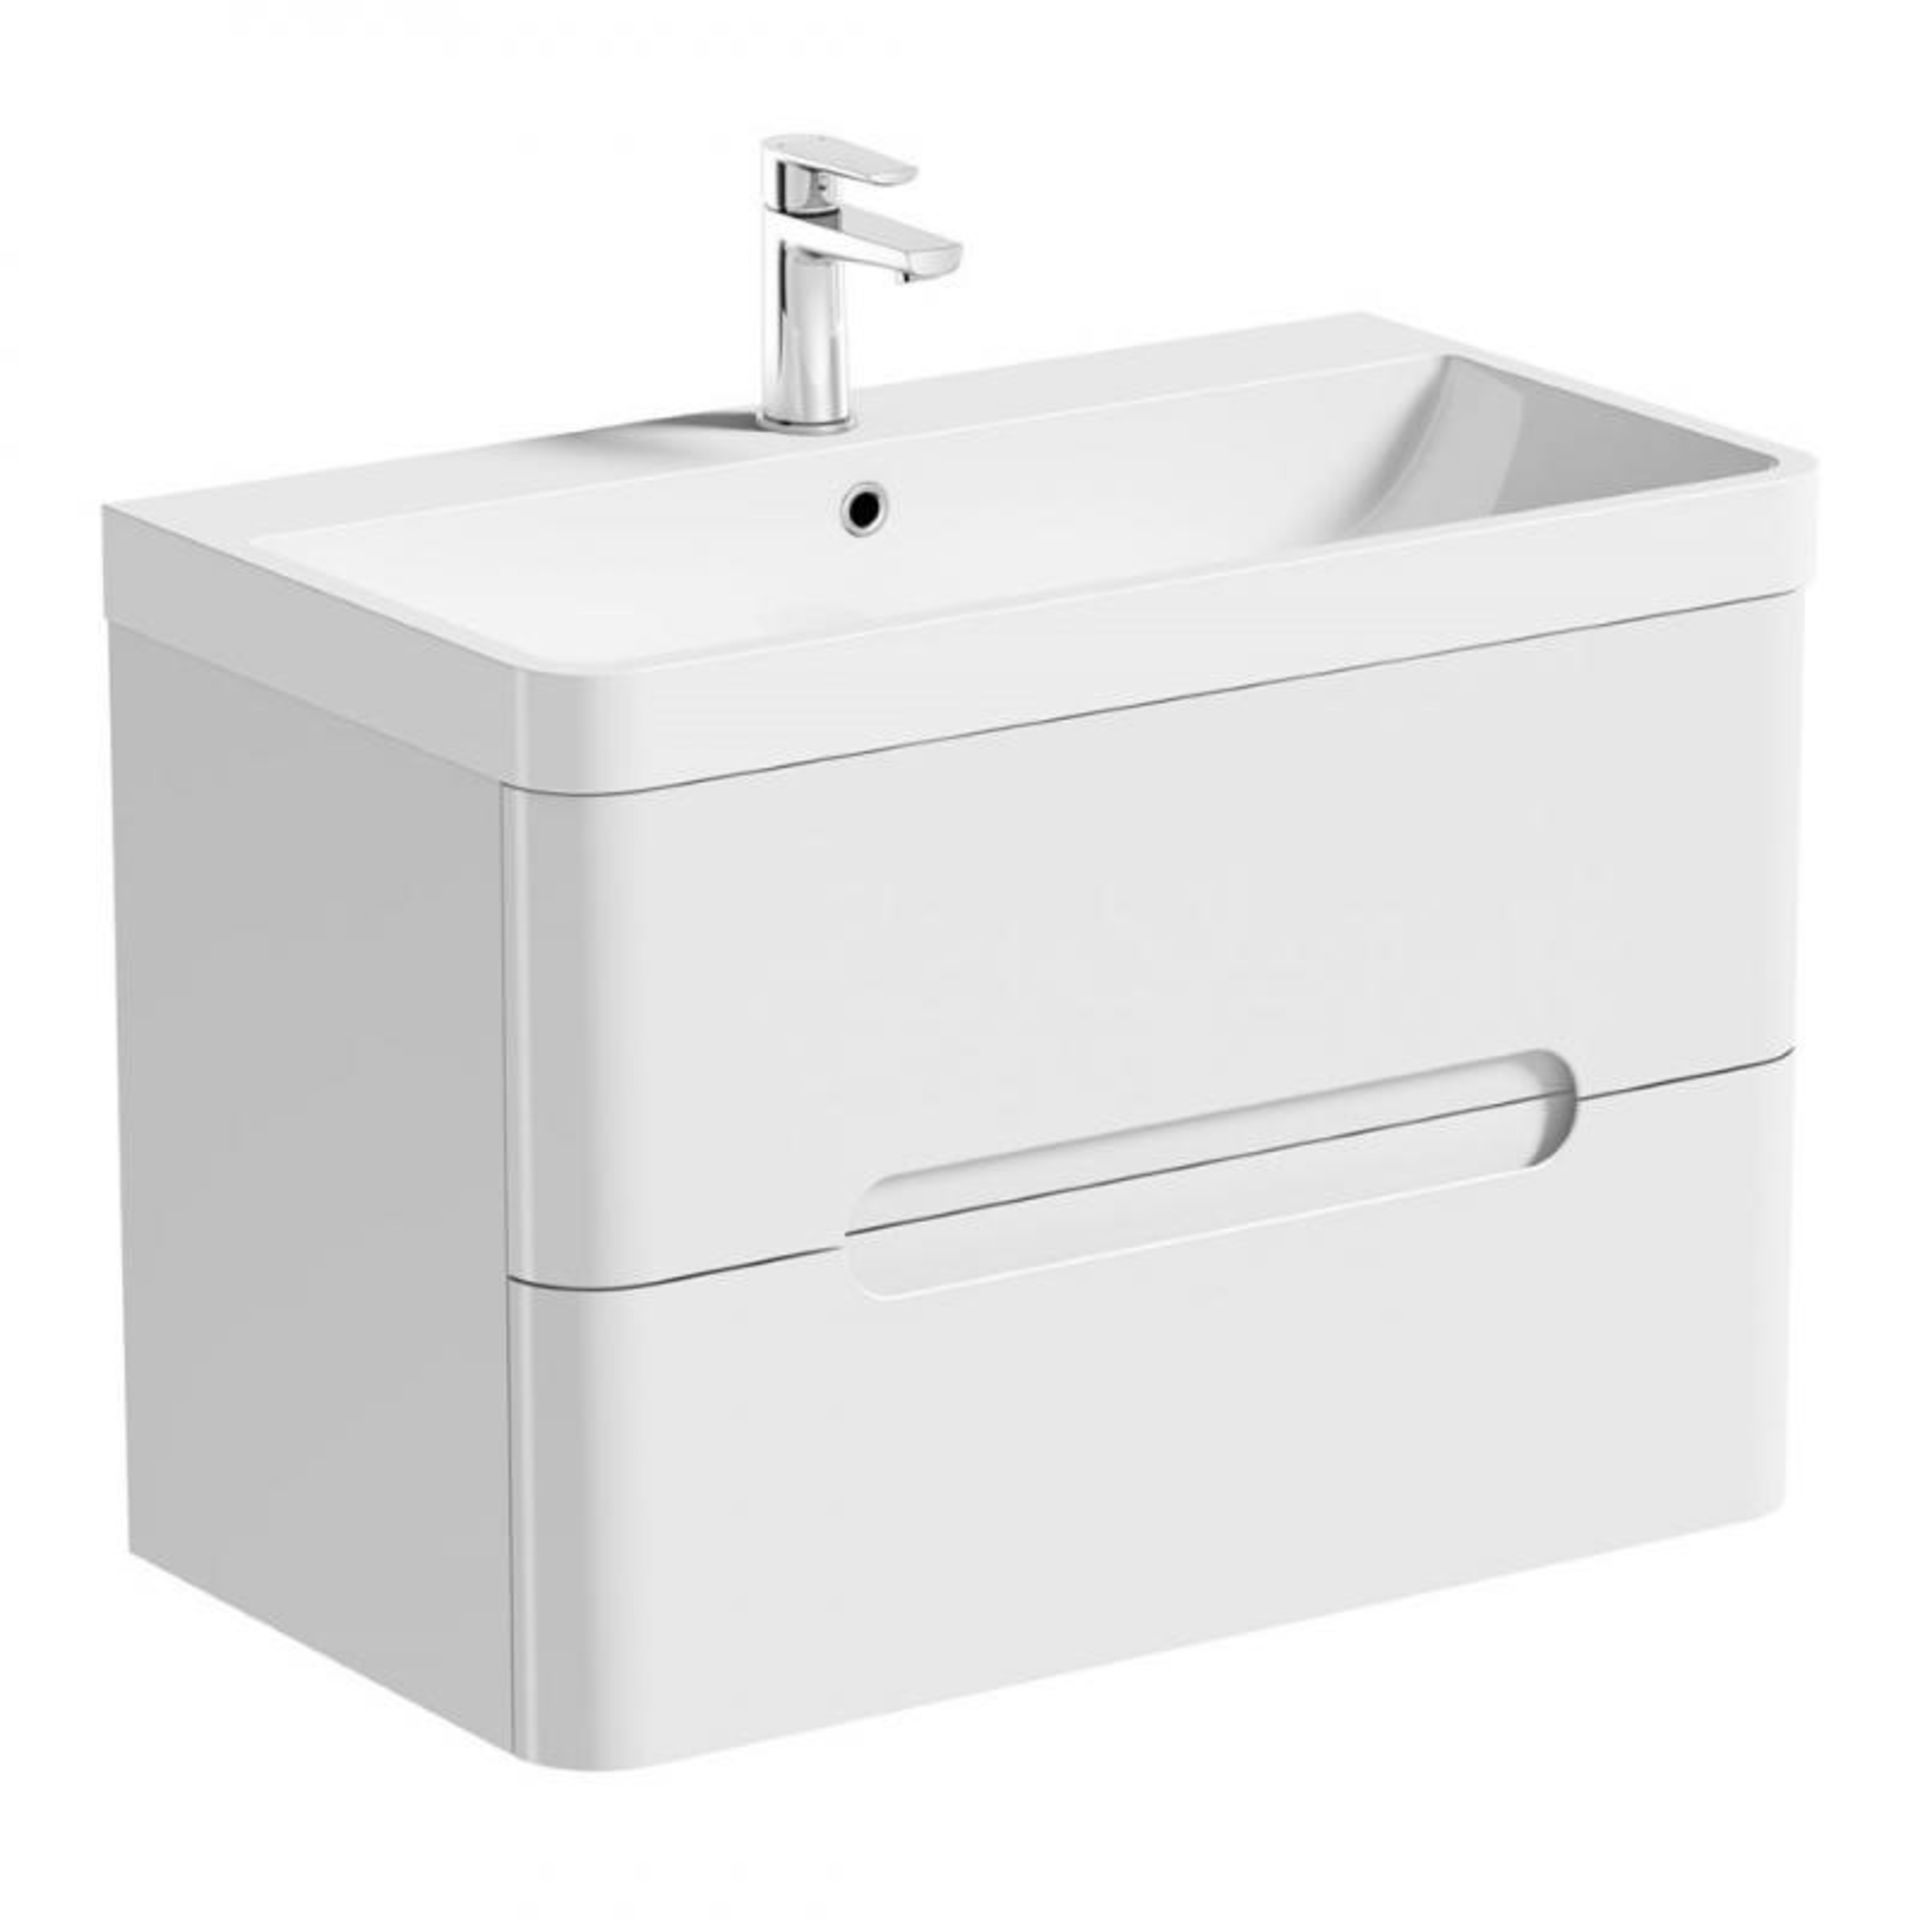 1 x Planet White Wall Hung Vanity Drawer Unit 800mm - Ref: DY170/WPL8002 - CL190 - Unused Stock - Lo - Image 8 of 8